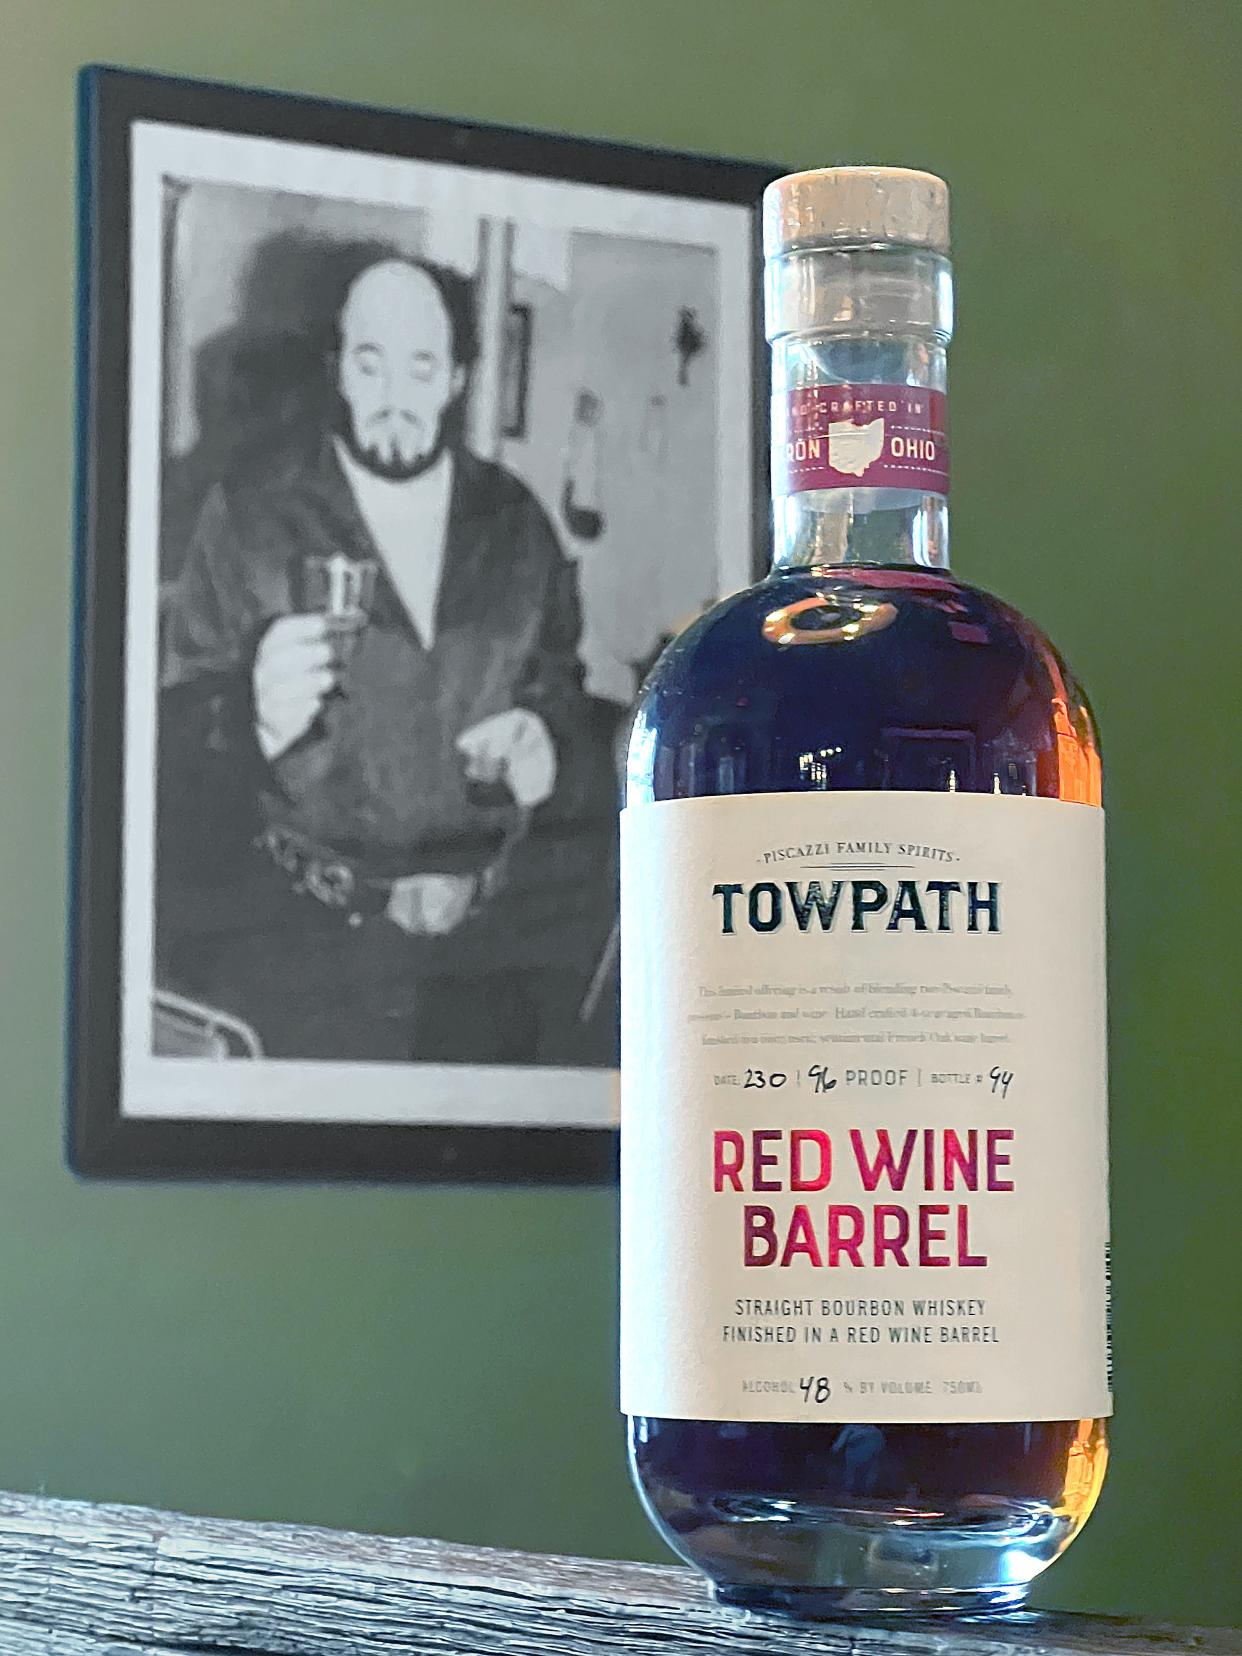 Towpath Distillery Red Wine Barrel bourbon was awarded a gold medal in the San Francisco Worlds Spirits Competition.